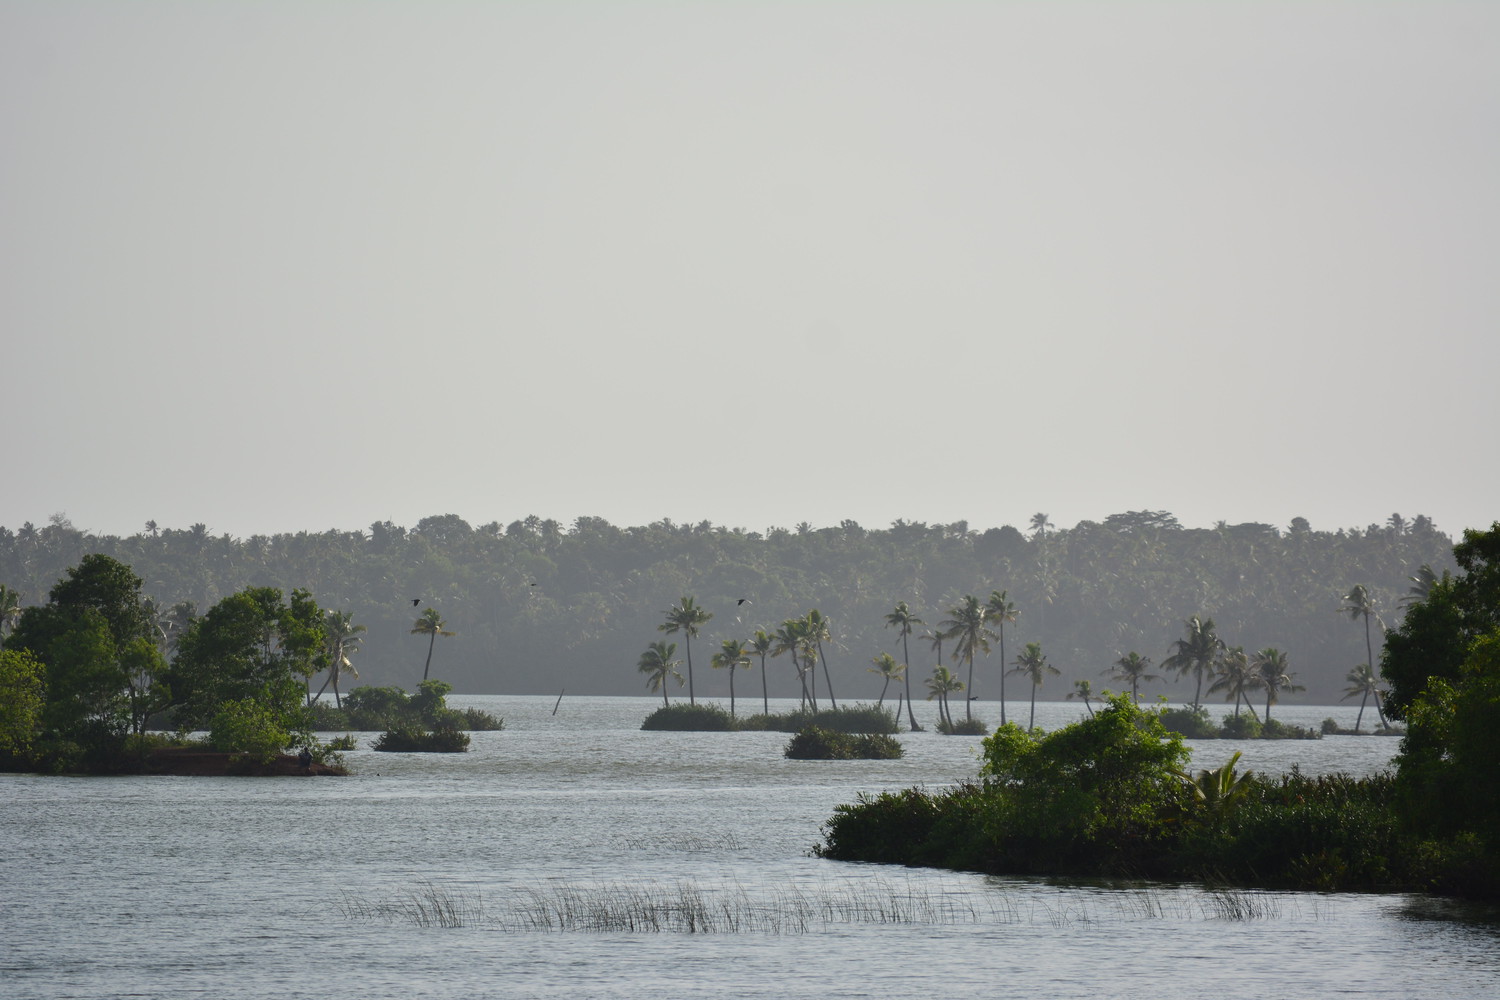 A lake with several tiny islands of trees and coconut palm trees in the background